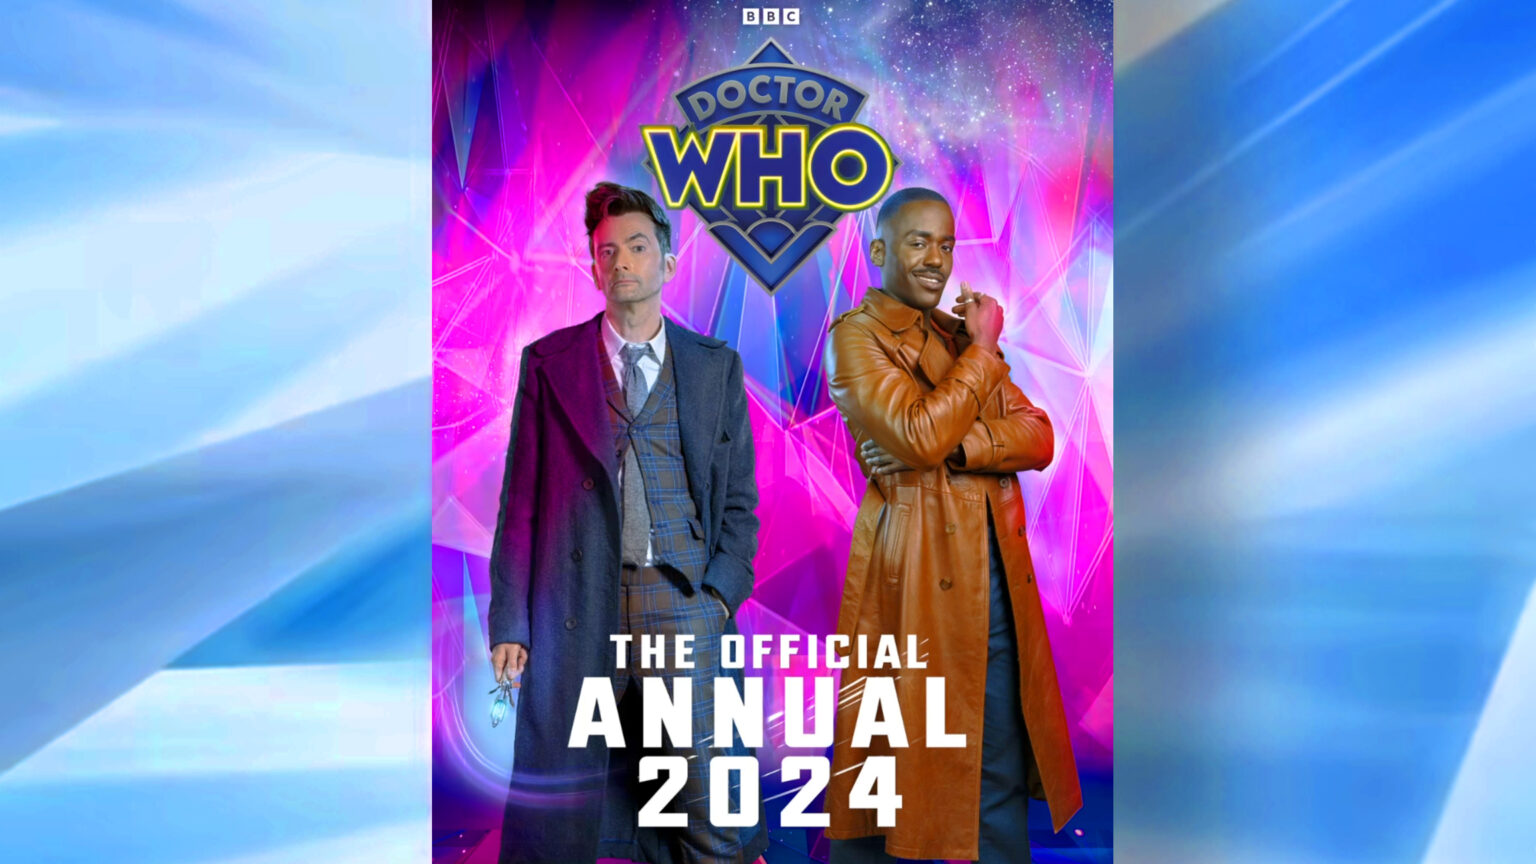 Doctor Who Annual 2024 cover and details